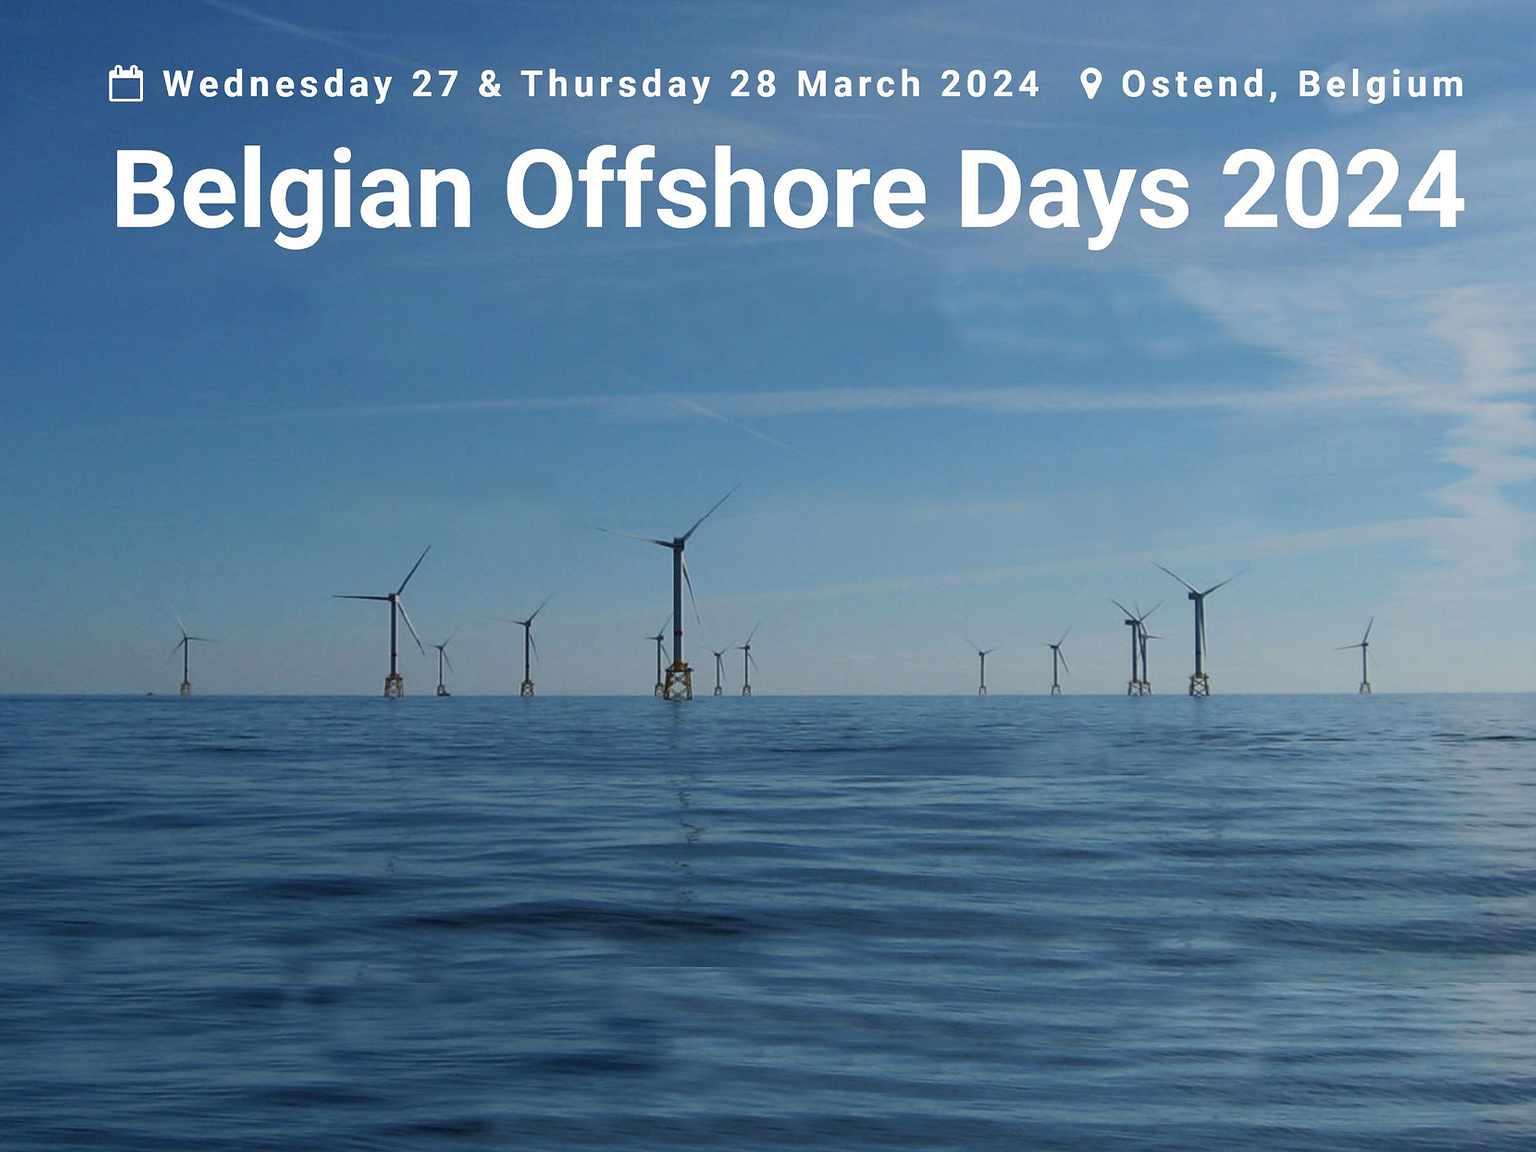 Skills & workforce for the ORE industry @ Belgian Offshore Days